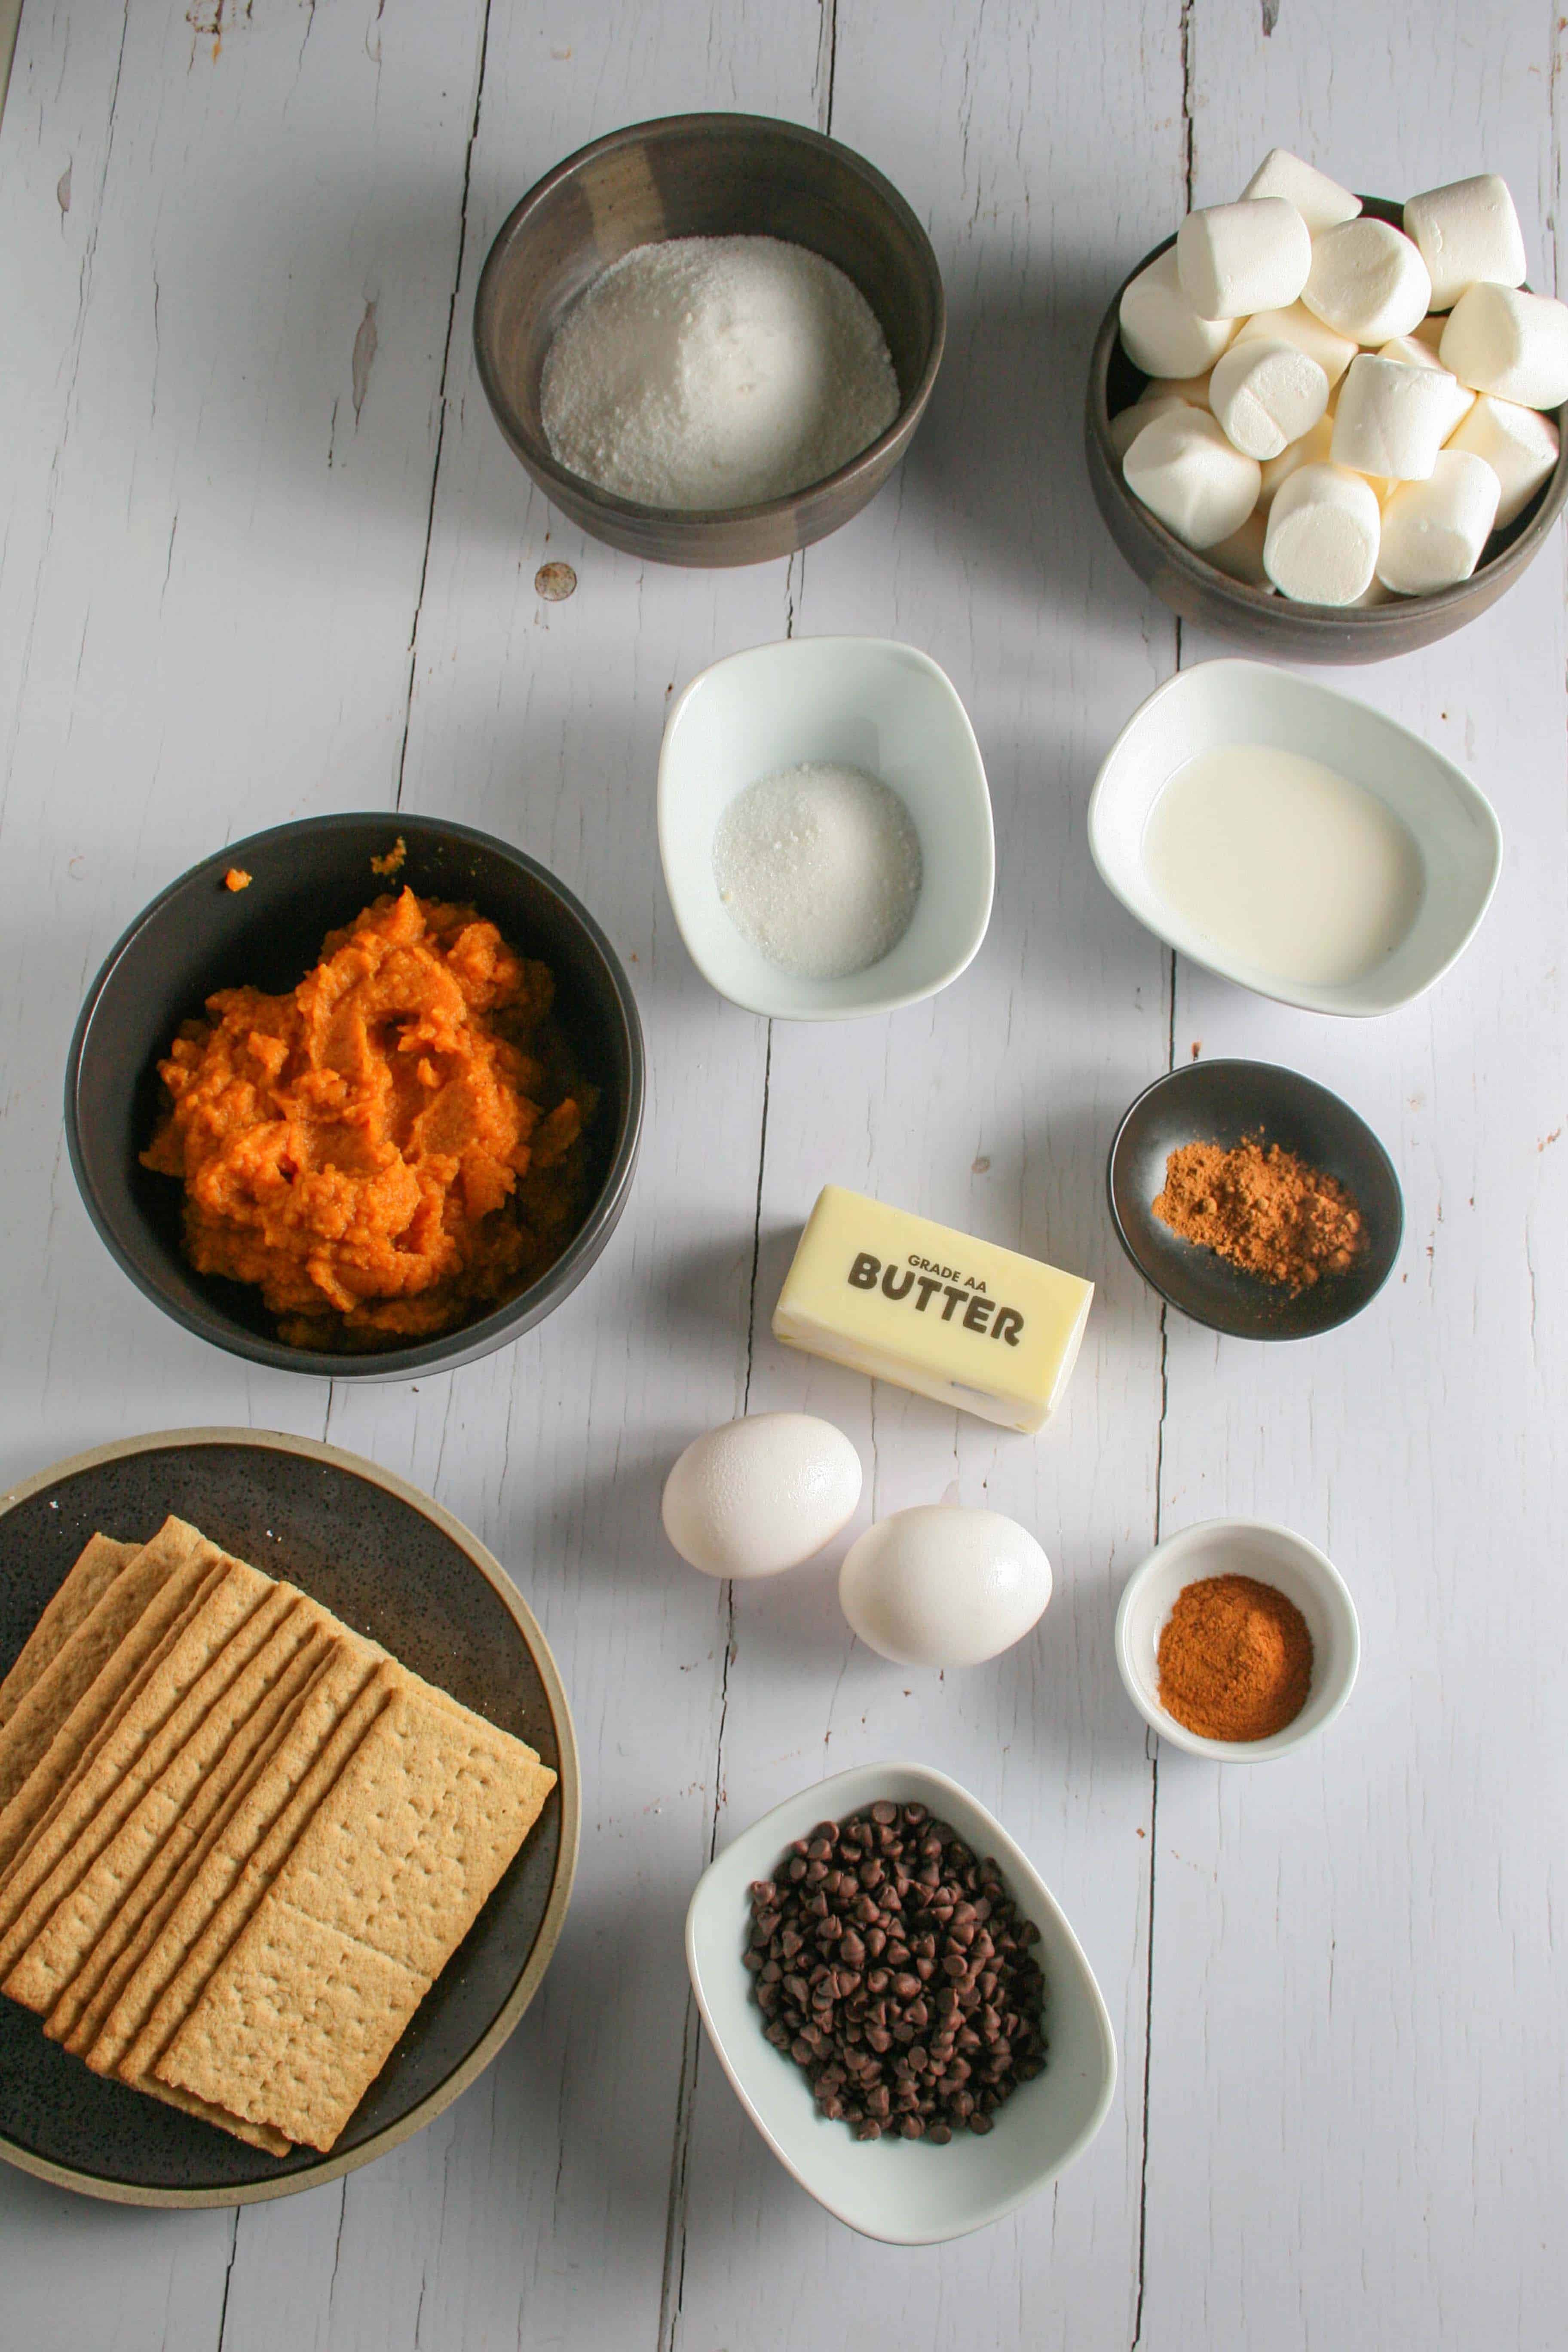 photo of ingredients for pumpkin smore's bars